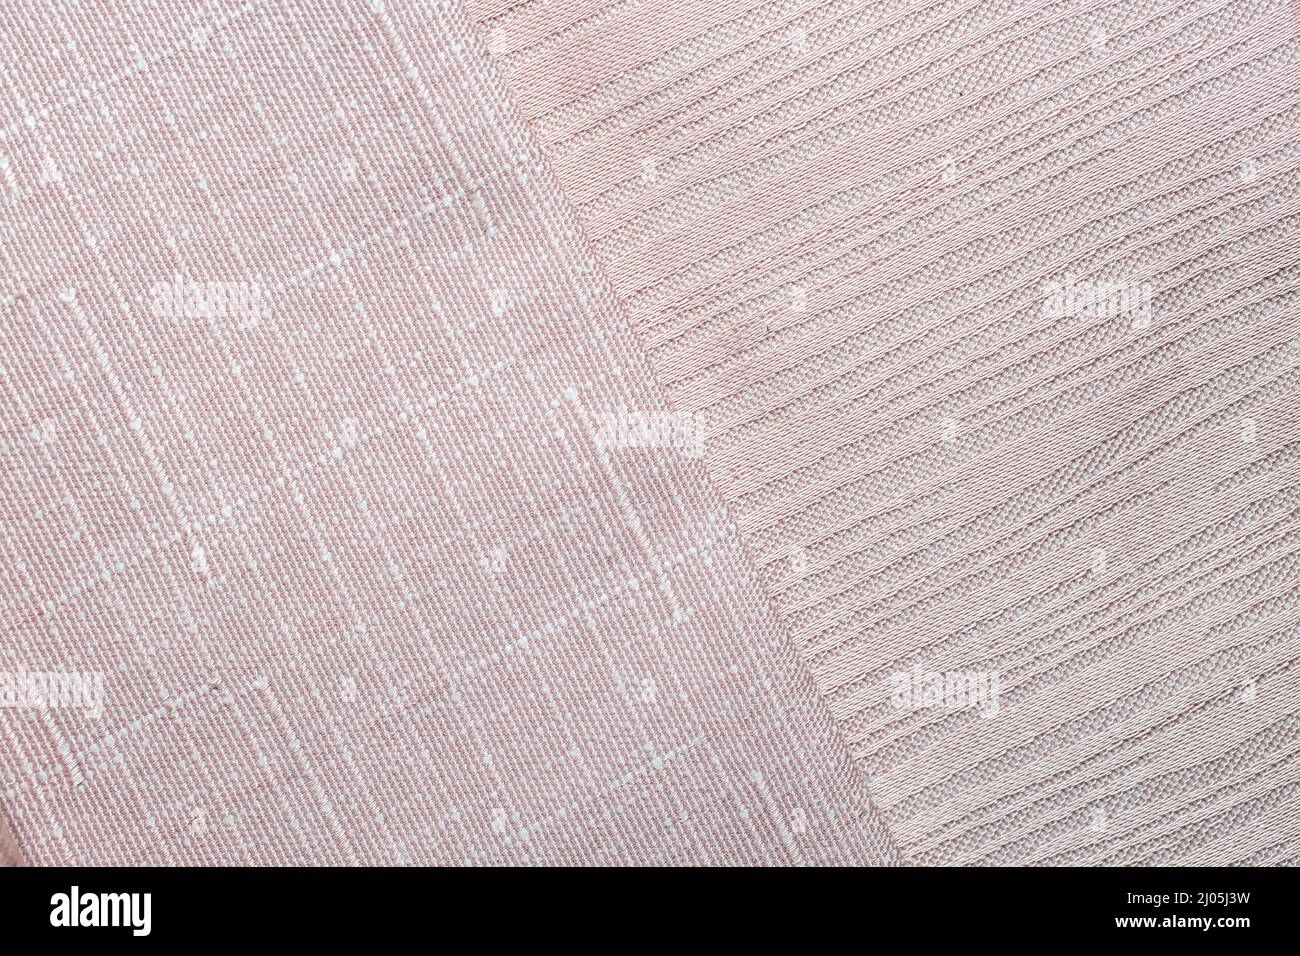 different textures on a pink fabric Stock Photo